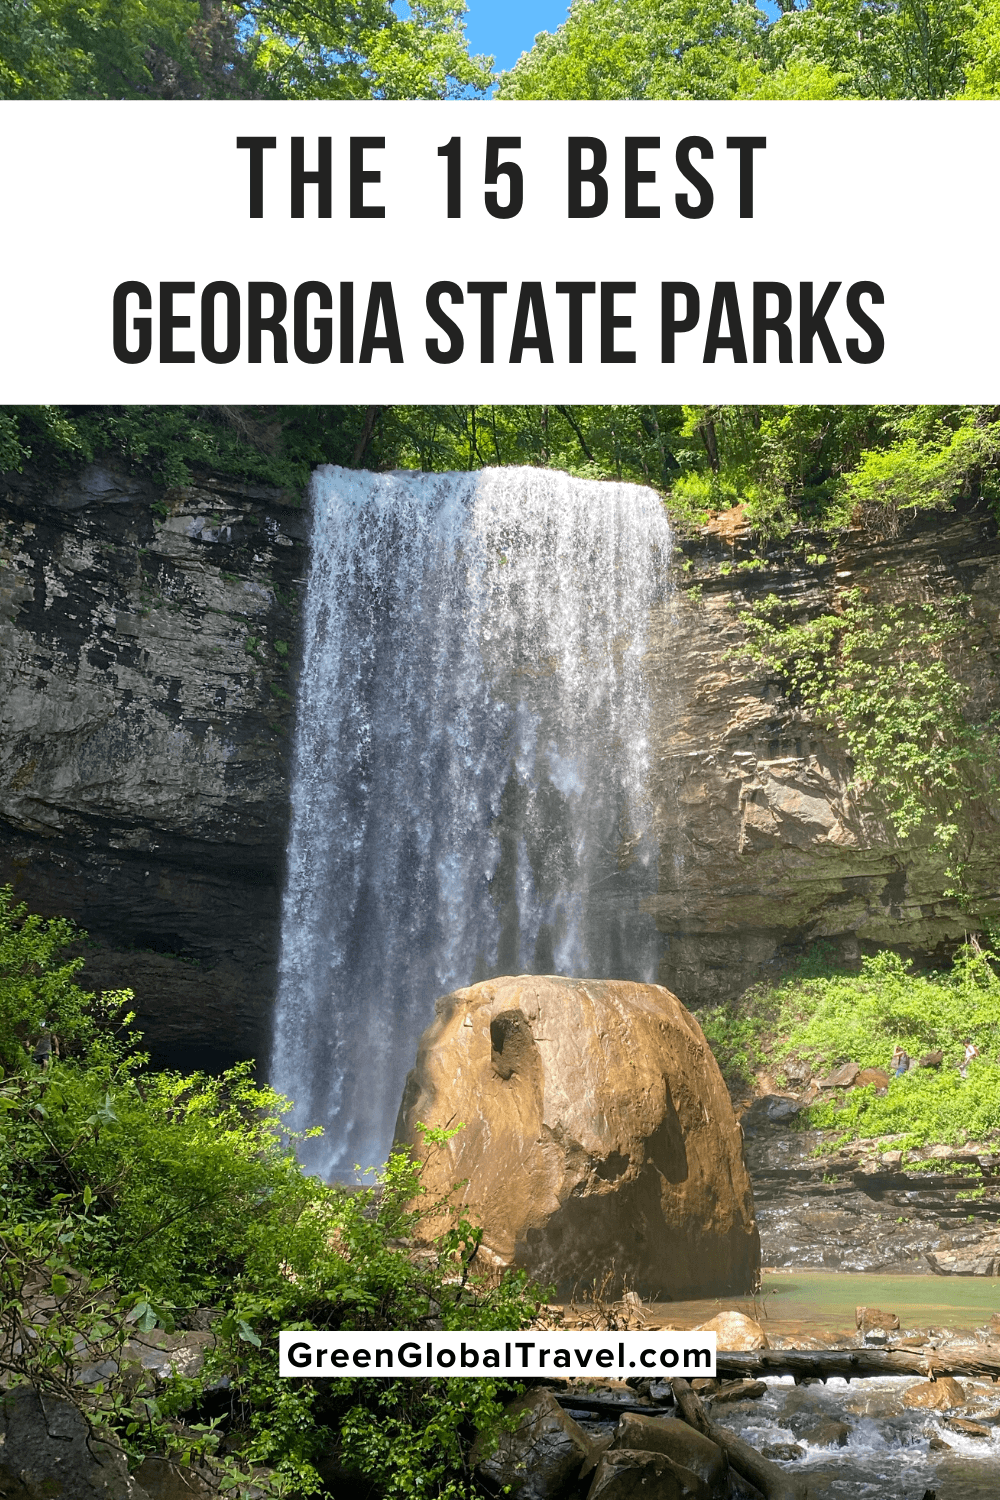 15 Best State Parks in Georgia with some of the best activities, attractions, and accommodations in each! | best state parks in georgia | ga state parks | georgia state parks camping | georgia parks | ga state parks camping | state parks in georgia | georgia state parks cabins | ga state parks cabins | gastateparks | ga state park | state parks georgia | georgia state parks rv camping | georgia state parks cabin rentals | parks in ga | state parks in georgia with waterfalls |